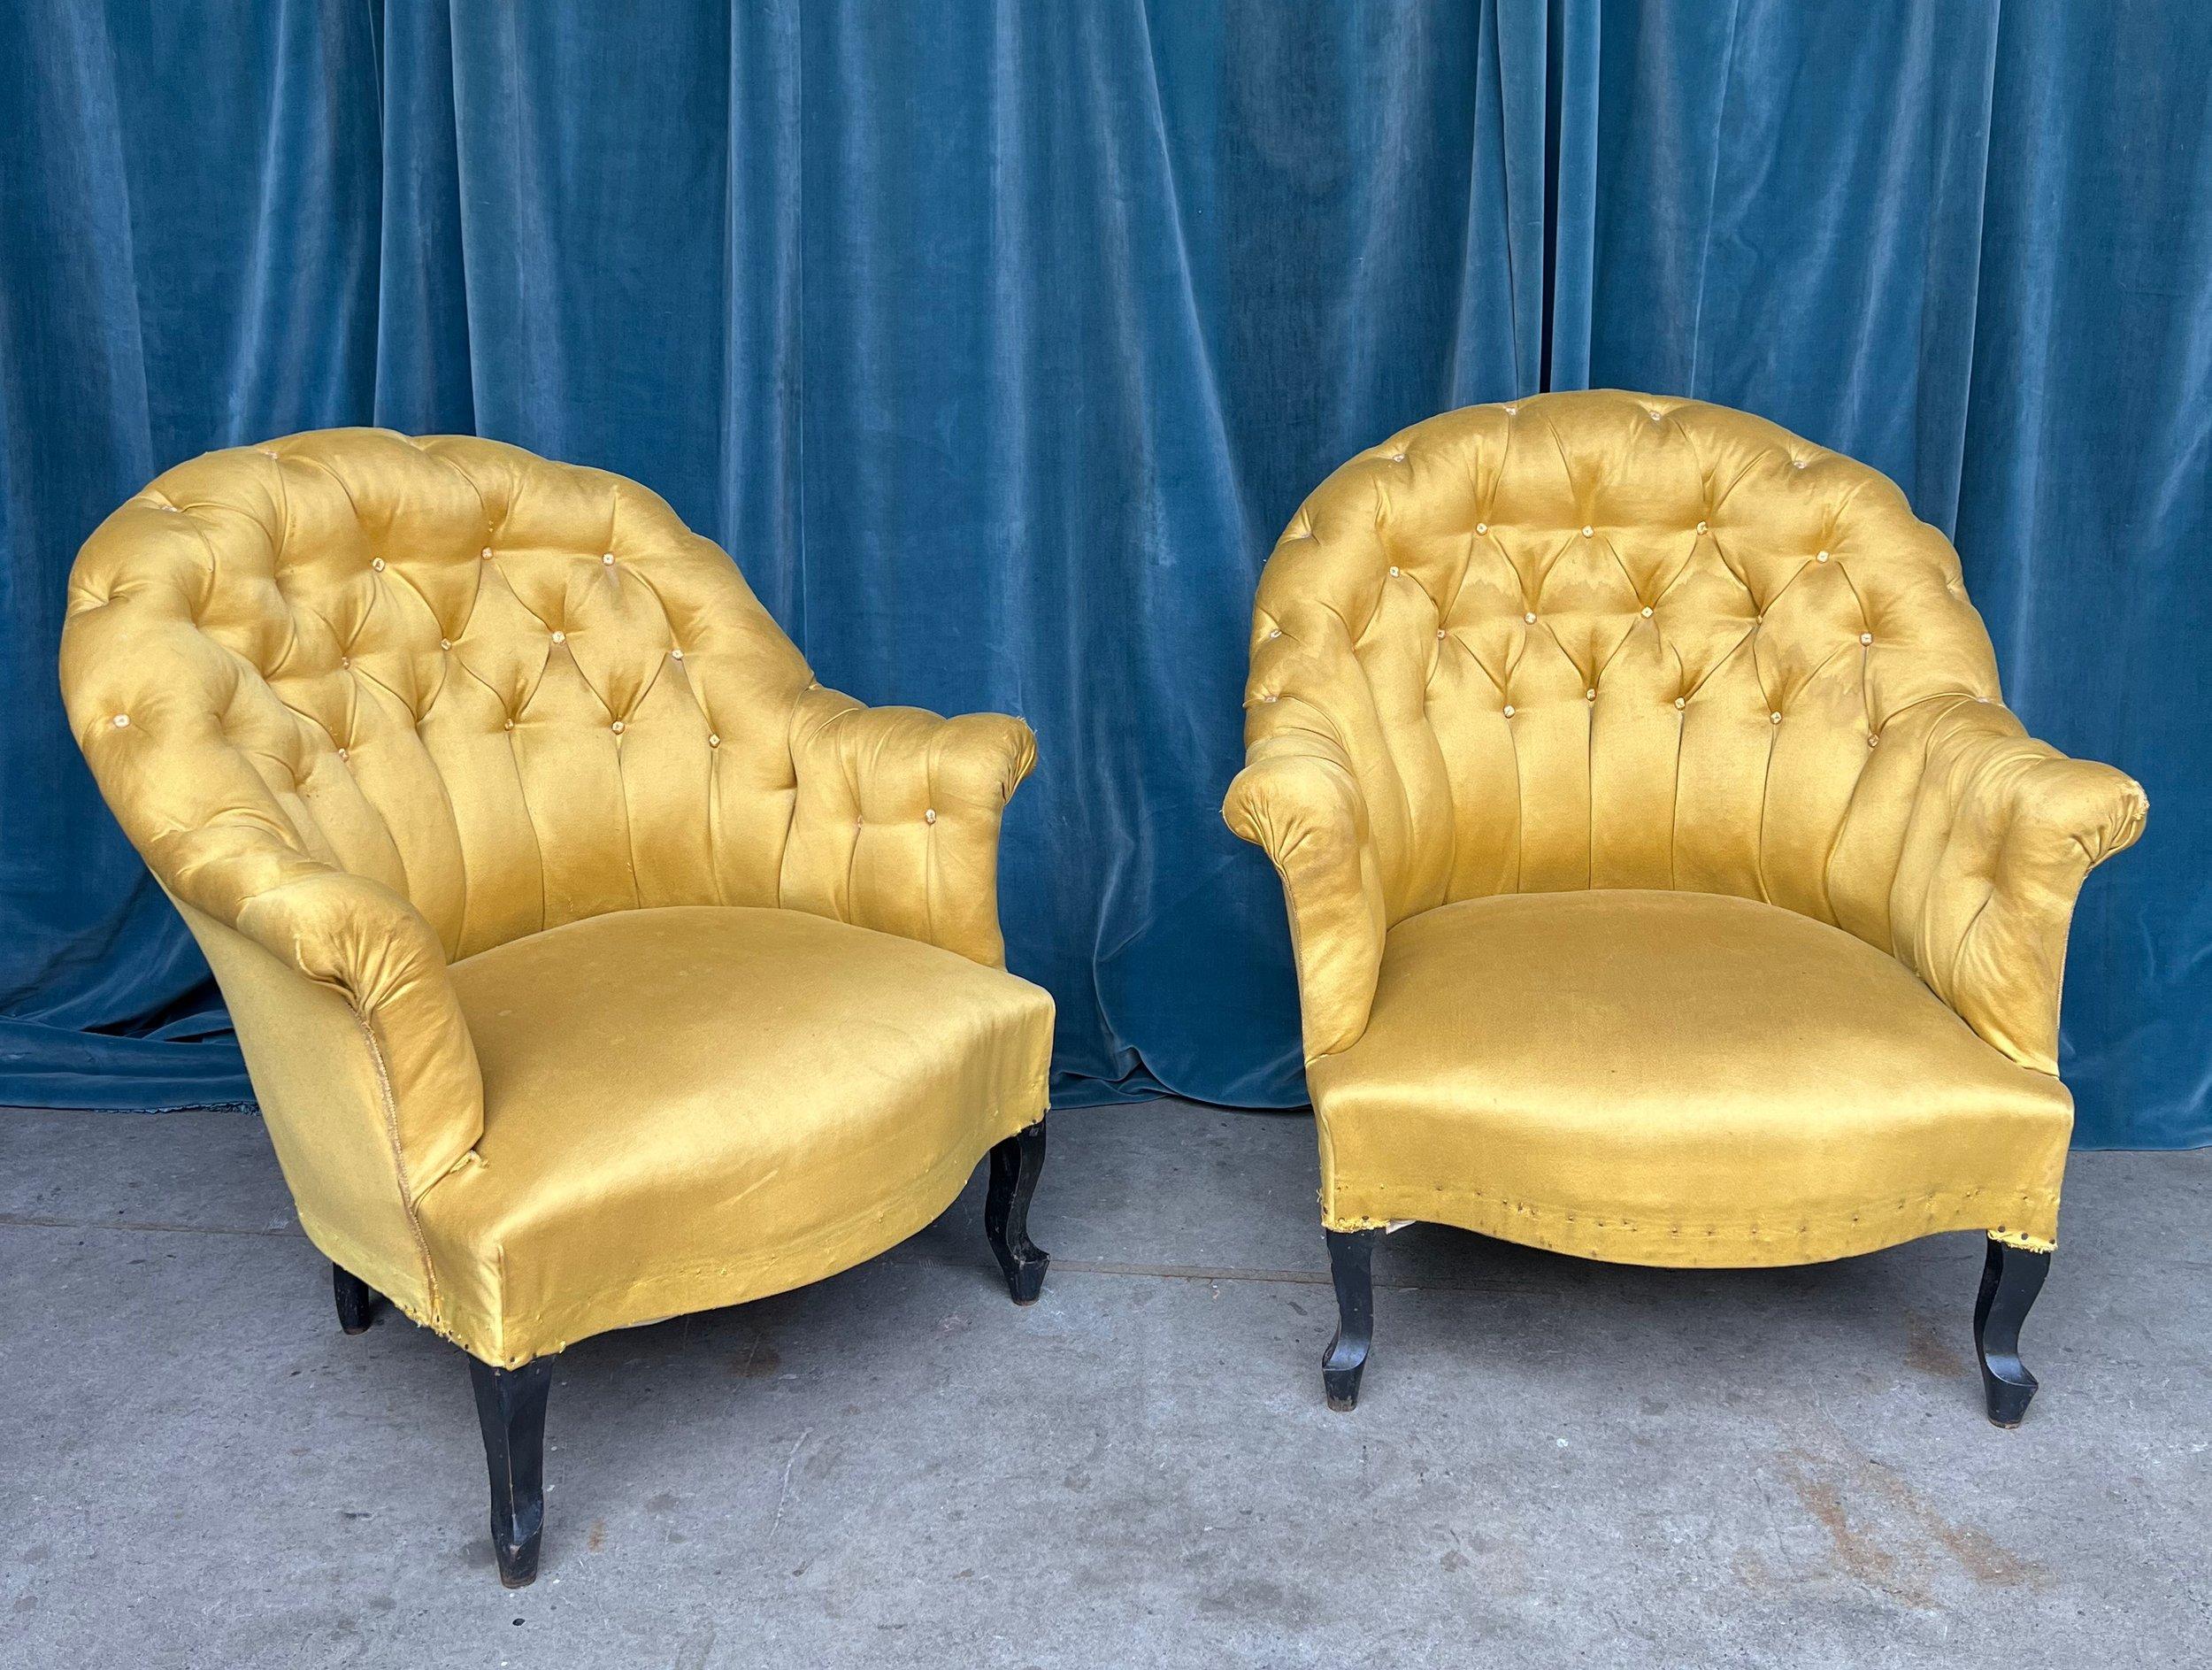 A handsome pair of French Napoleon III armchairs from the late 19th century, offering both comfort and style in abundance. Upholstered in a stunning vintage gold fabric, these chairs exude a stately presence that blends seamlessly with traditional